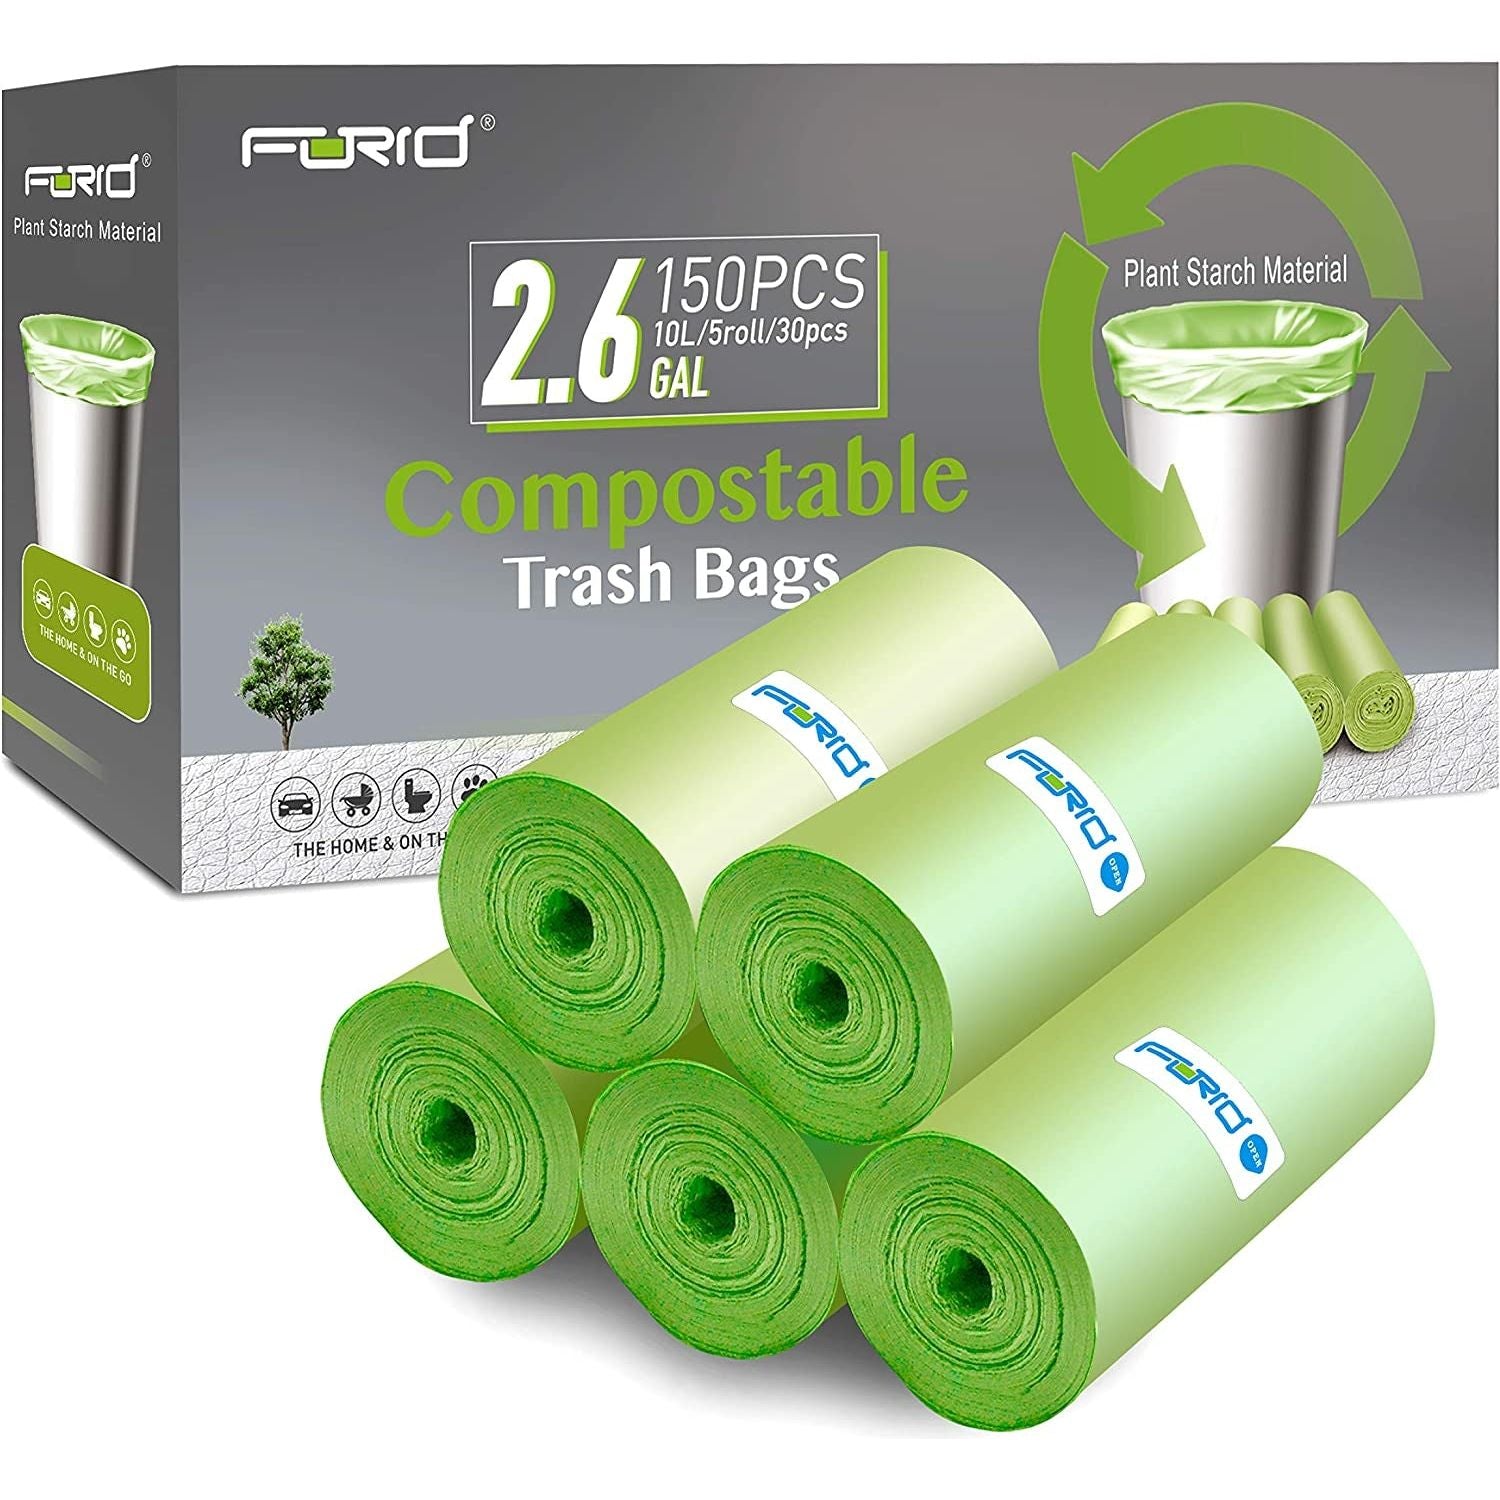 Small Trash Bags -  2.6 Gallon Compostable Garbage Bags 150 Count Mini Strong Trash Can Liners 10 Liter Unscented Wastebasket Bags for Kitchen Bathroom Home Office (5Rolls/Green)